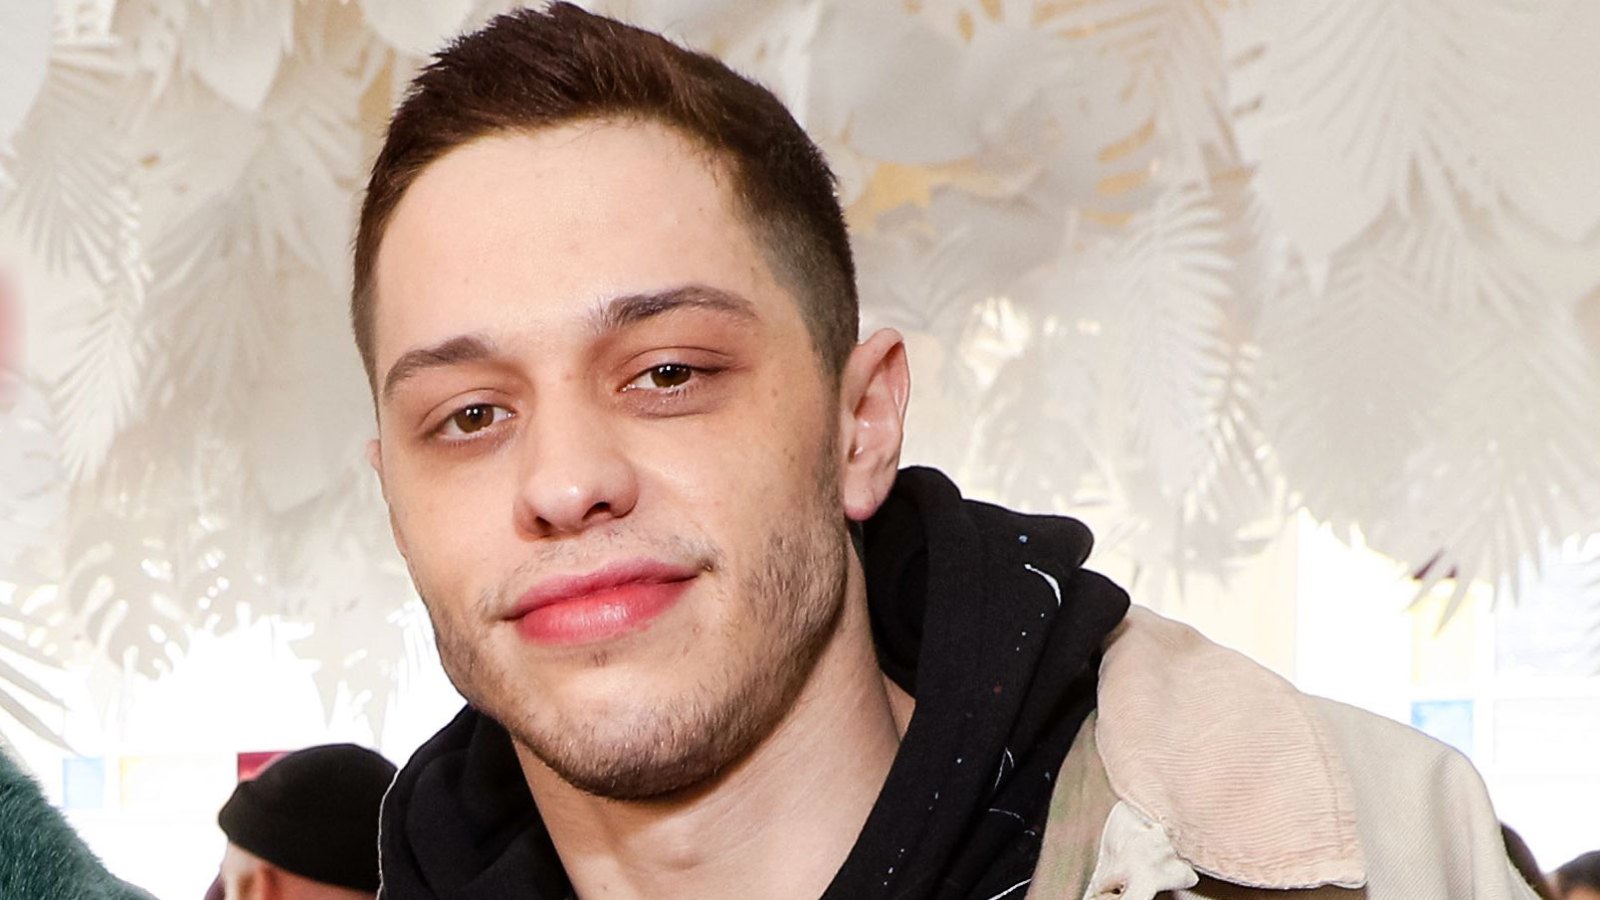 Pete Davidson Requires Fans Sign a $1 Million NDA Before His Comedy Shows